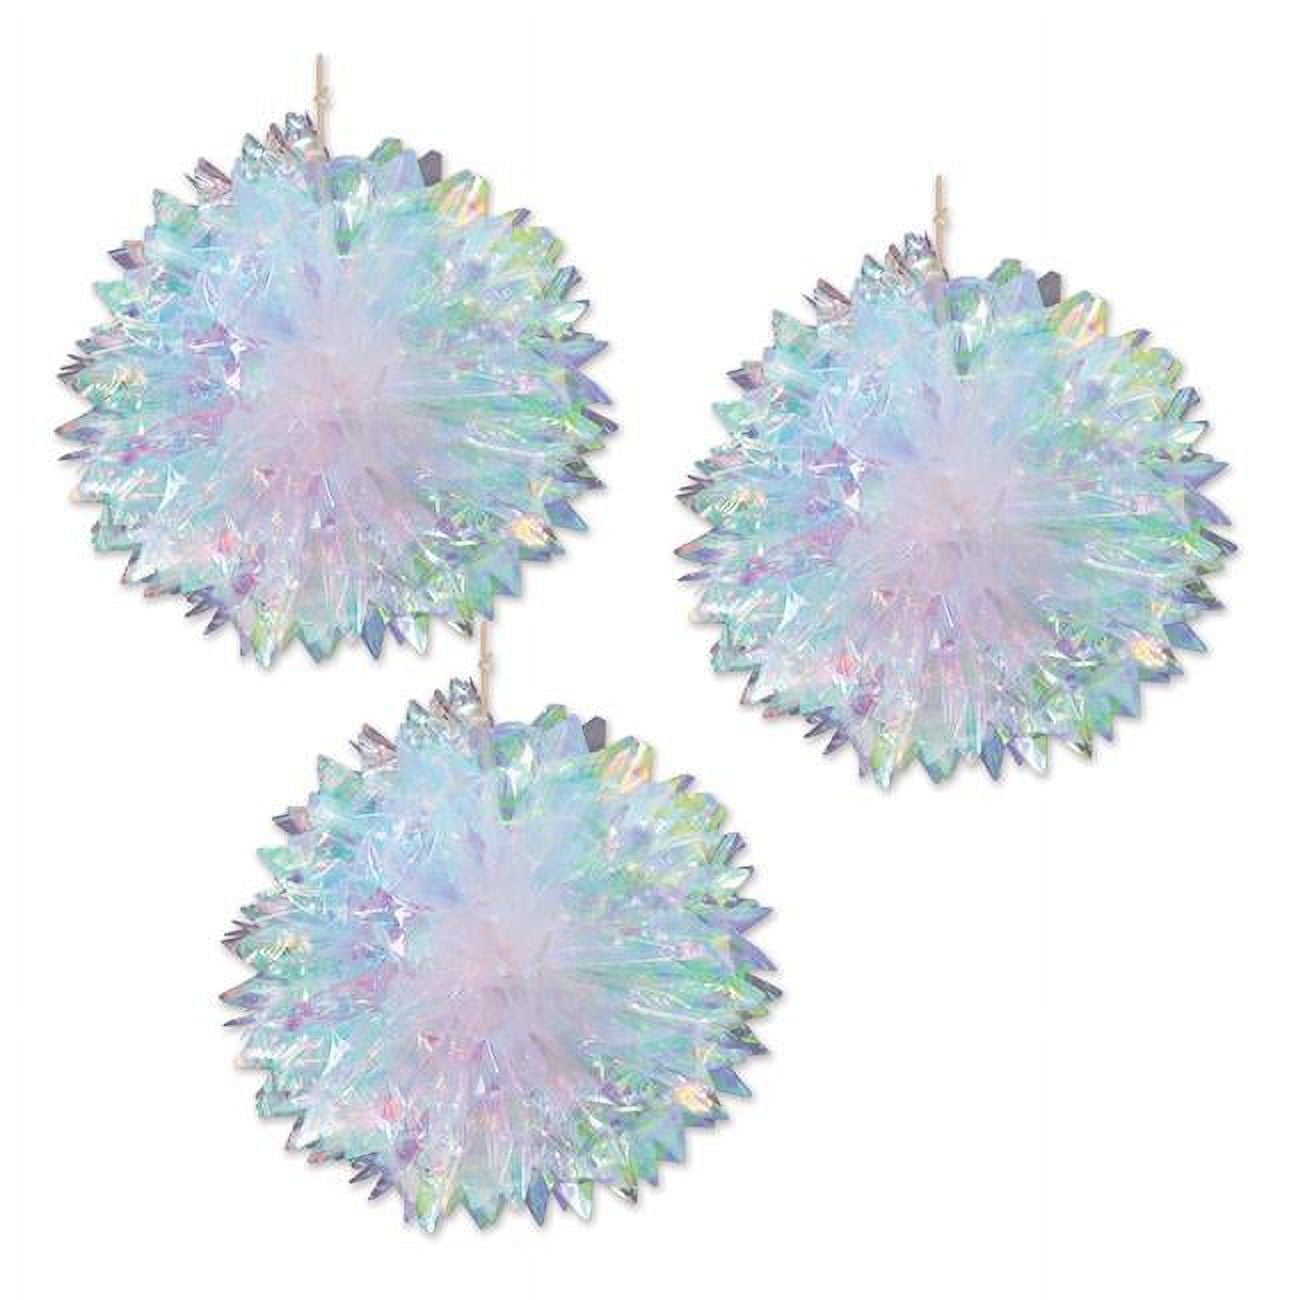 Picture of Beistle 53529 16 in. Iridescent Fluff Balls - Pack of 6